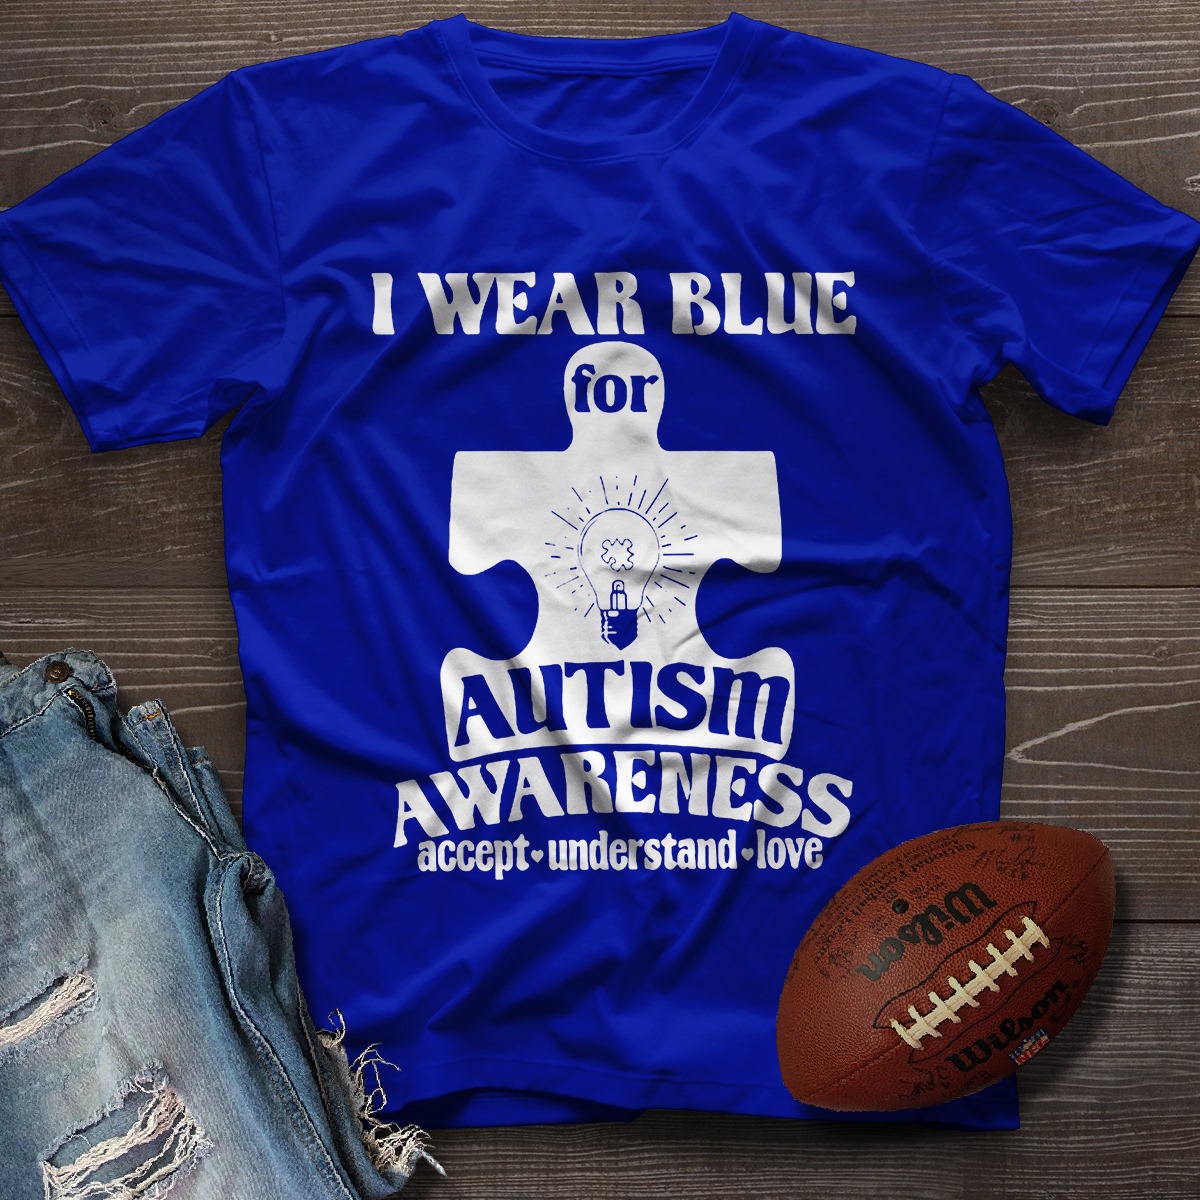 I wear blue for autism awareness - Accept, understand and love